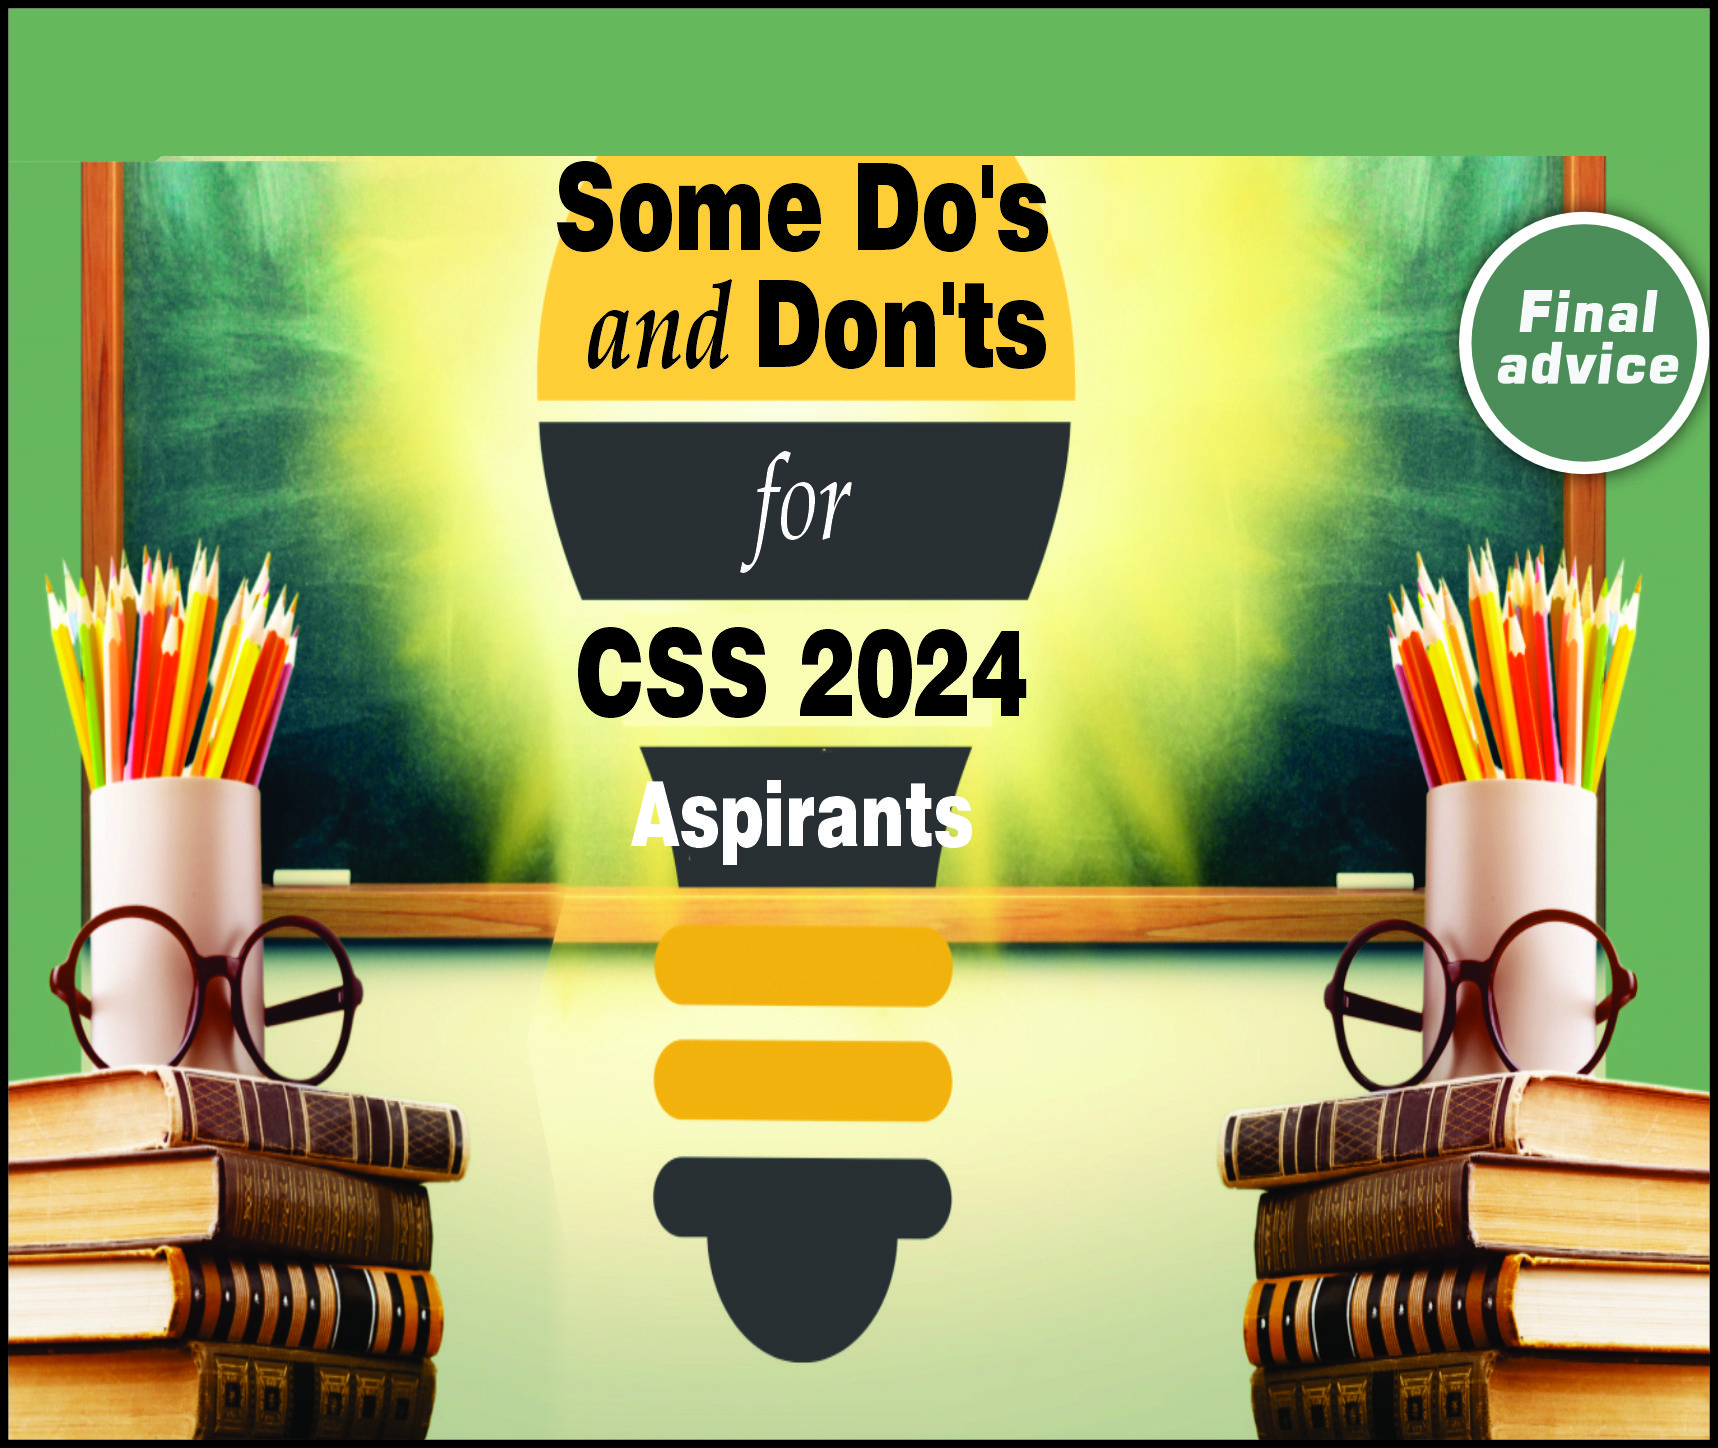 You are currently viewing Some Do’s and Don’ts for CSS 2024 Aspirants